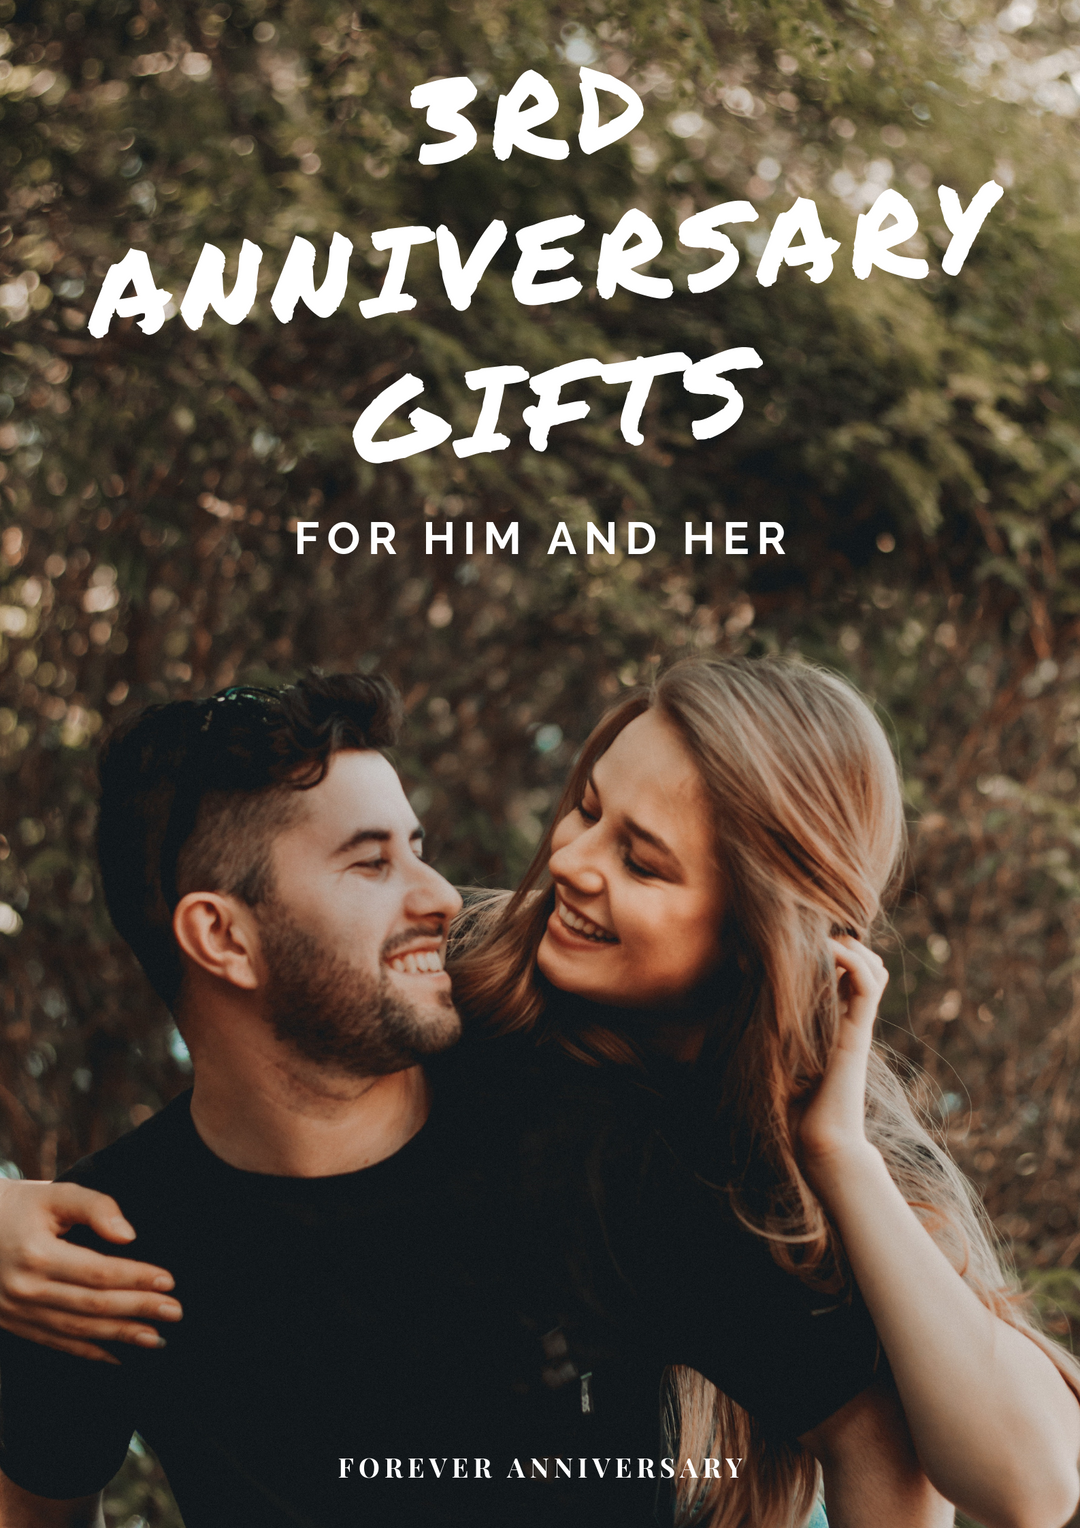 3rd Anniversary Gifts for Him and Her